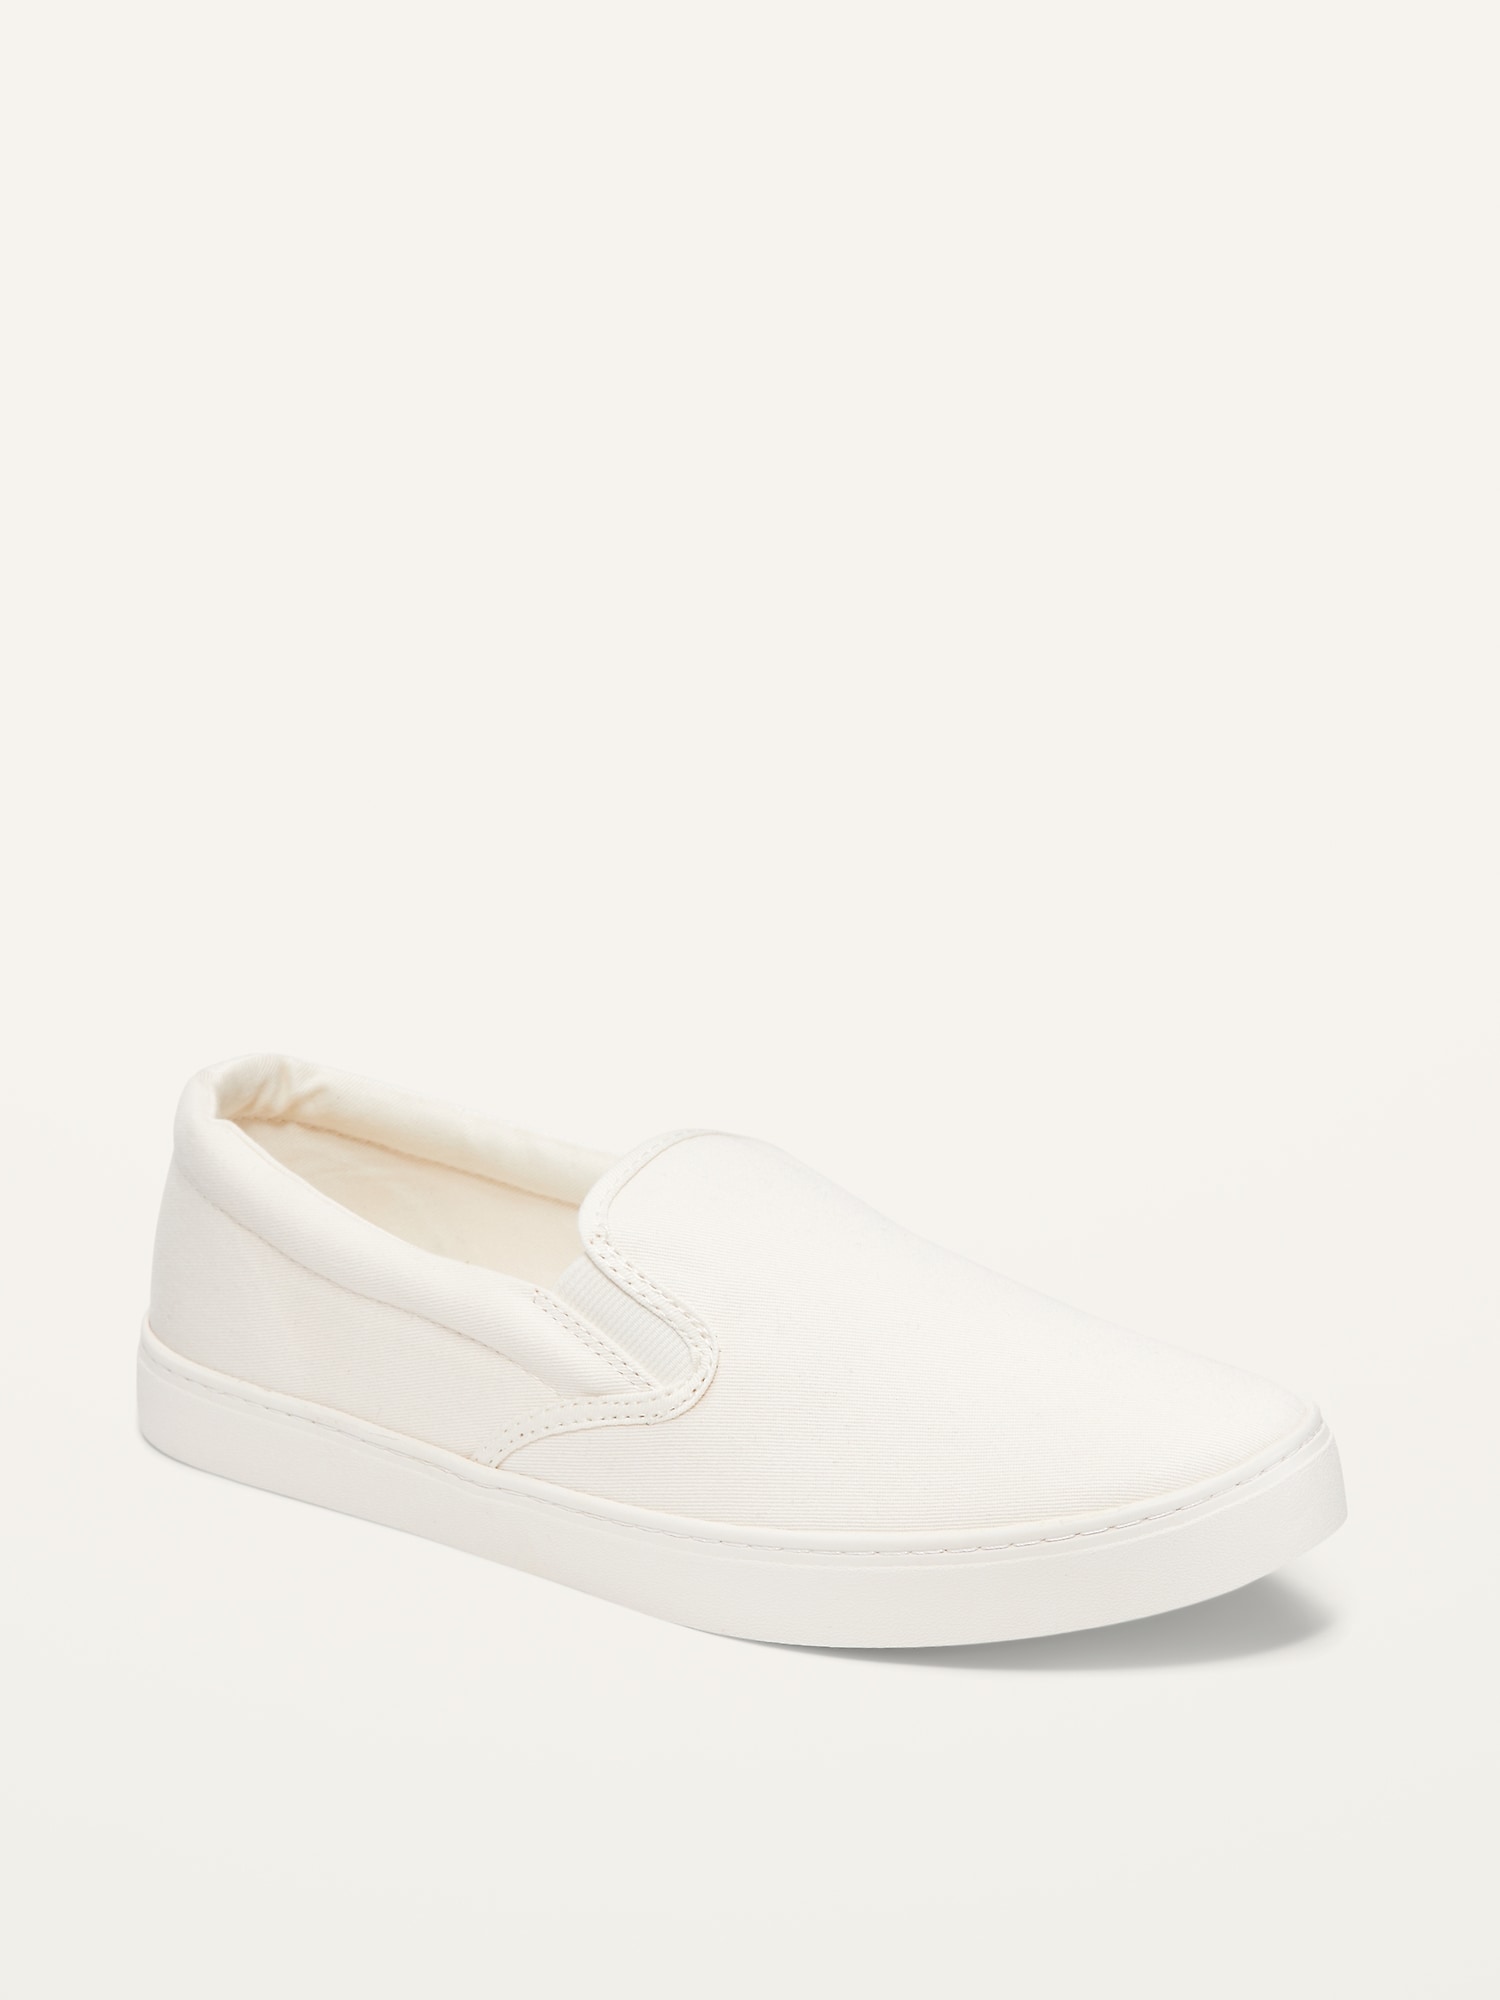 Old Navy Canvas Slip-On Sneakers white. 1